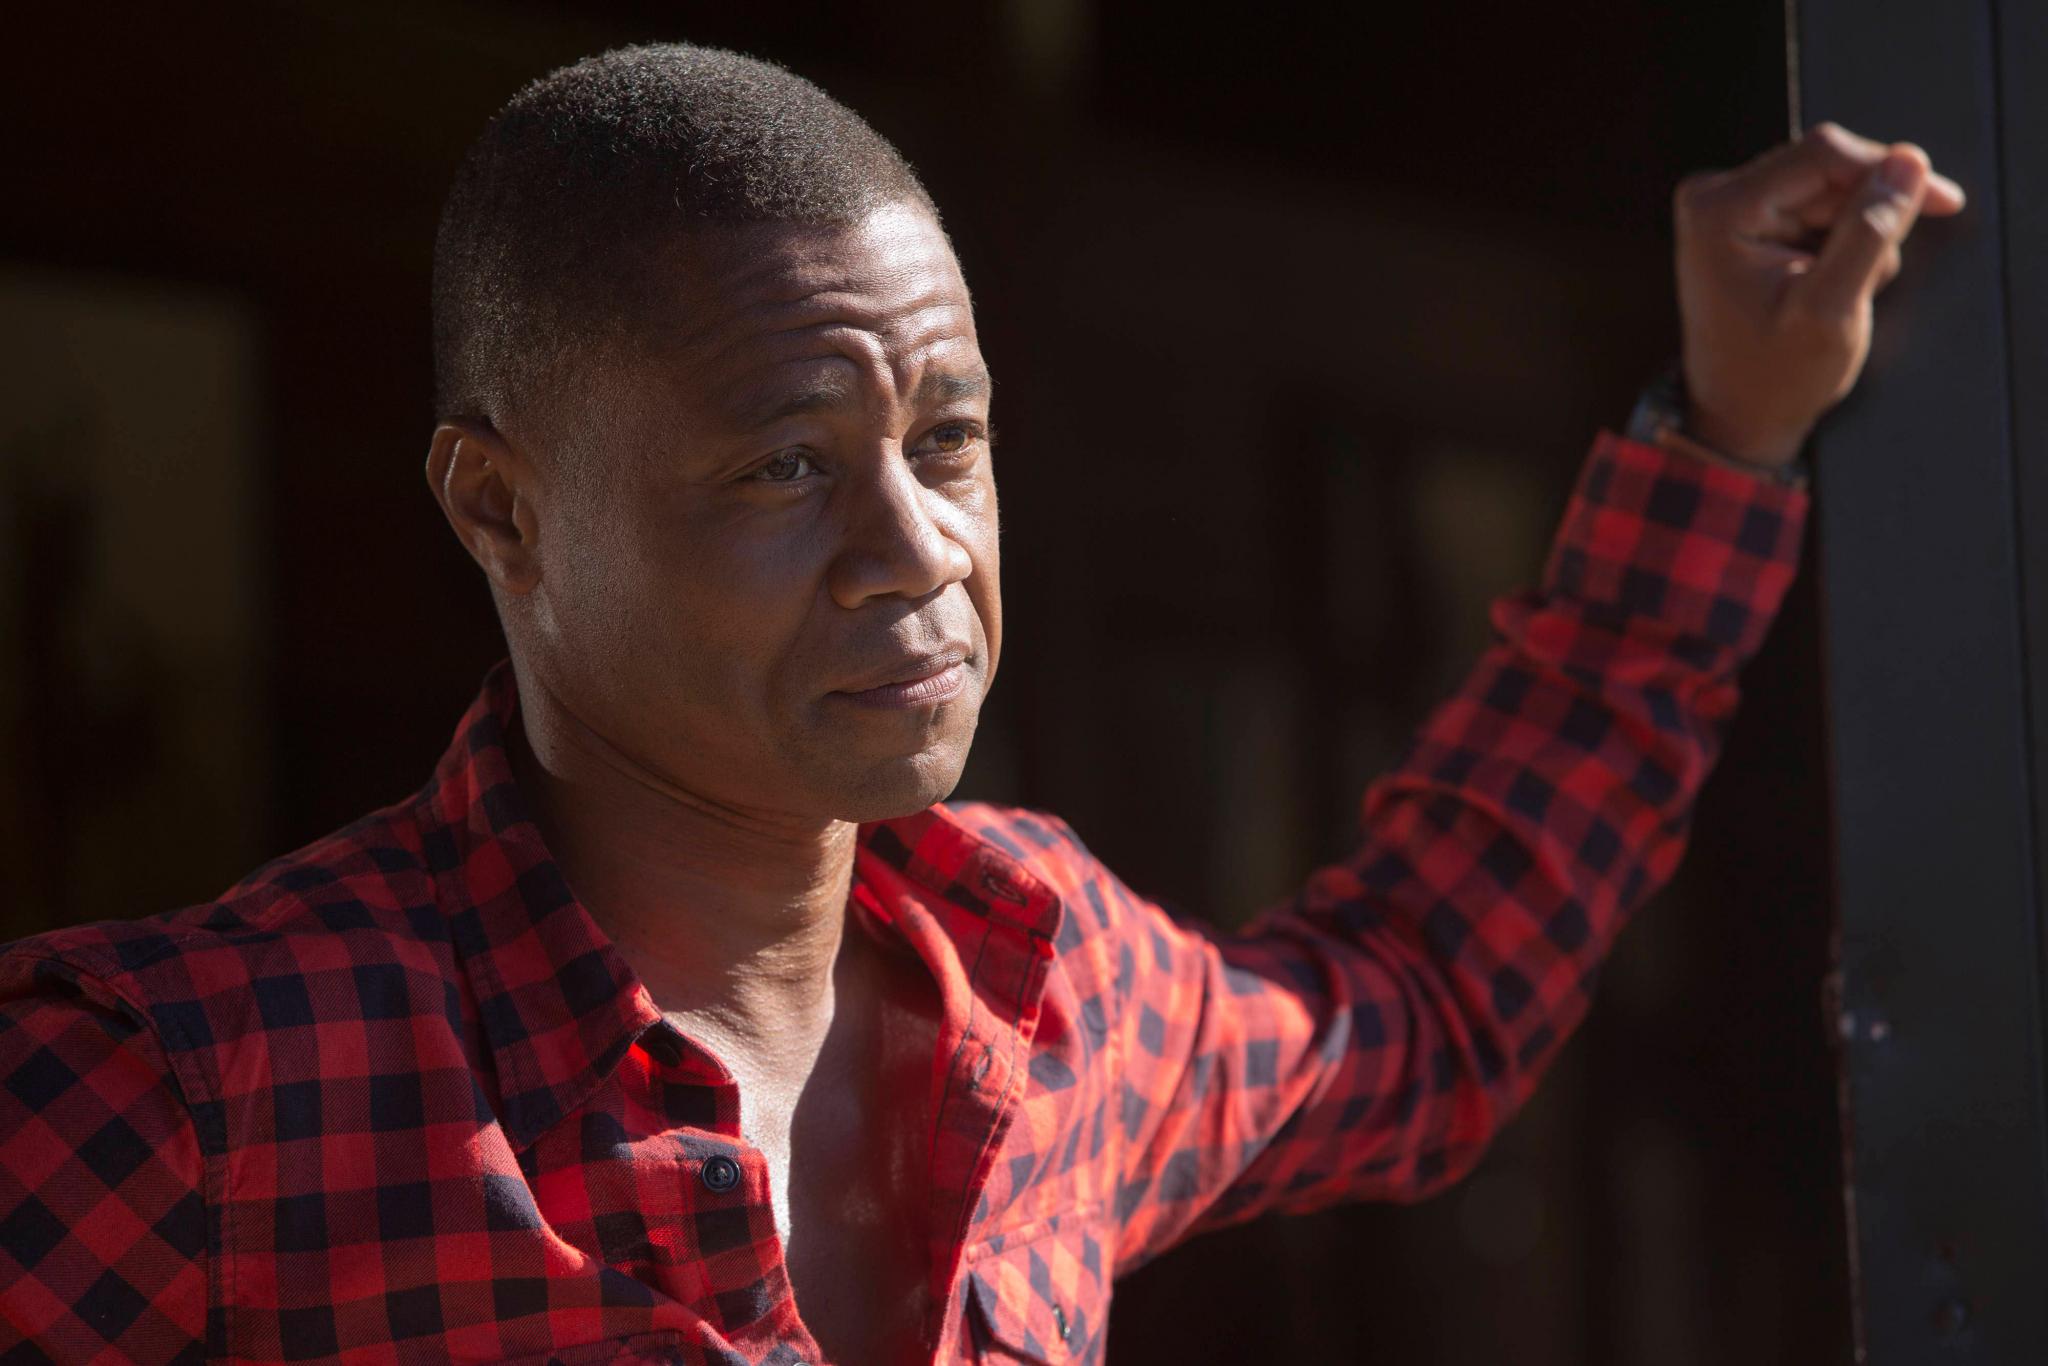 Cuba Gooding, Jr.'s Lawyer Says 'No Criminality' Took Place After Actor's Accused Of Groping A Woman